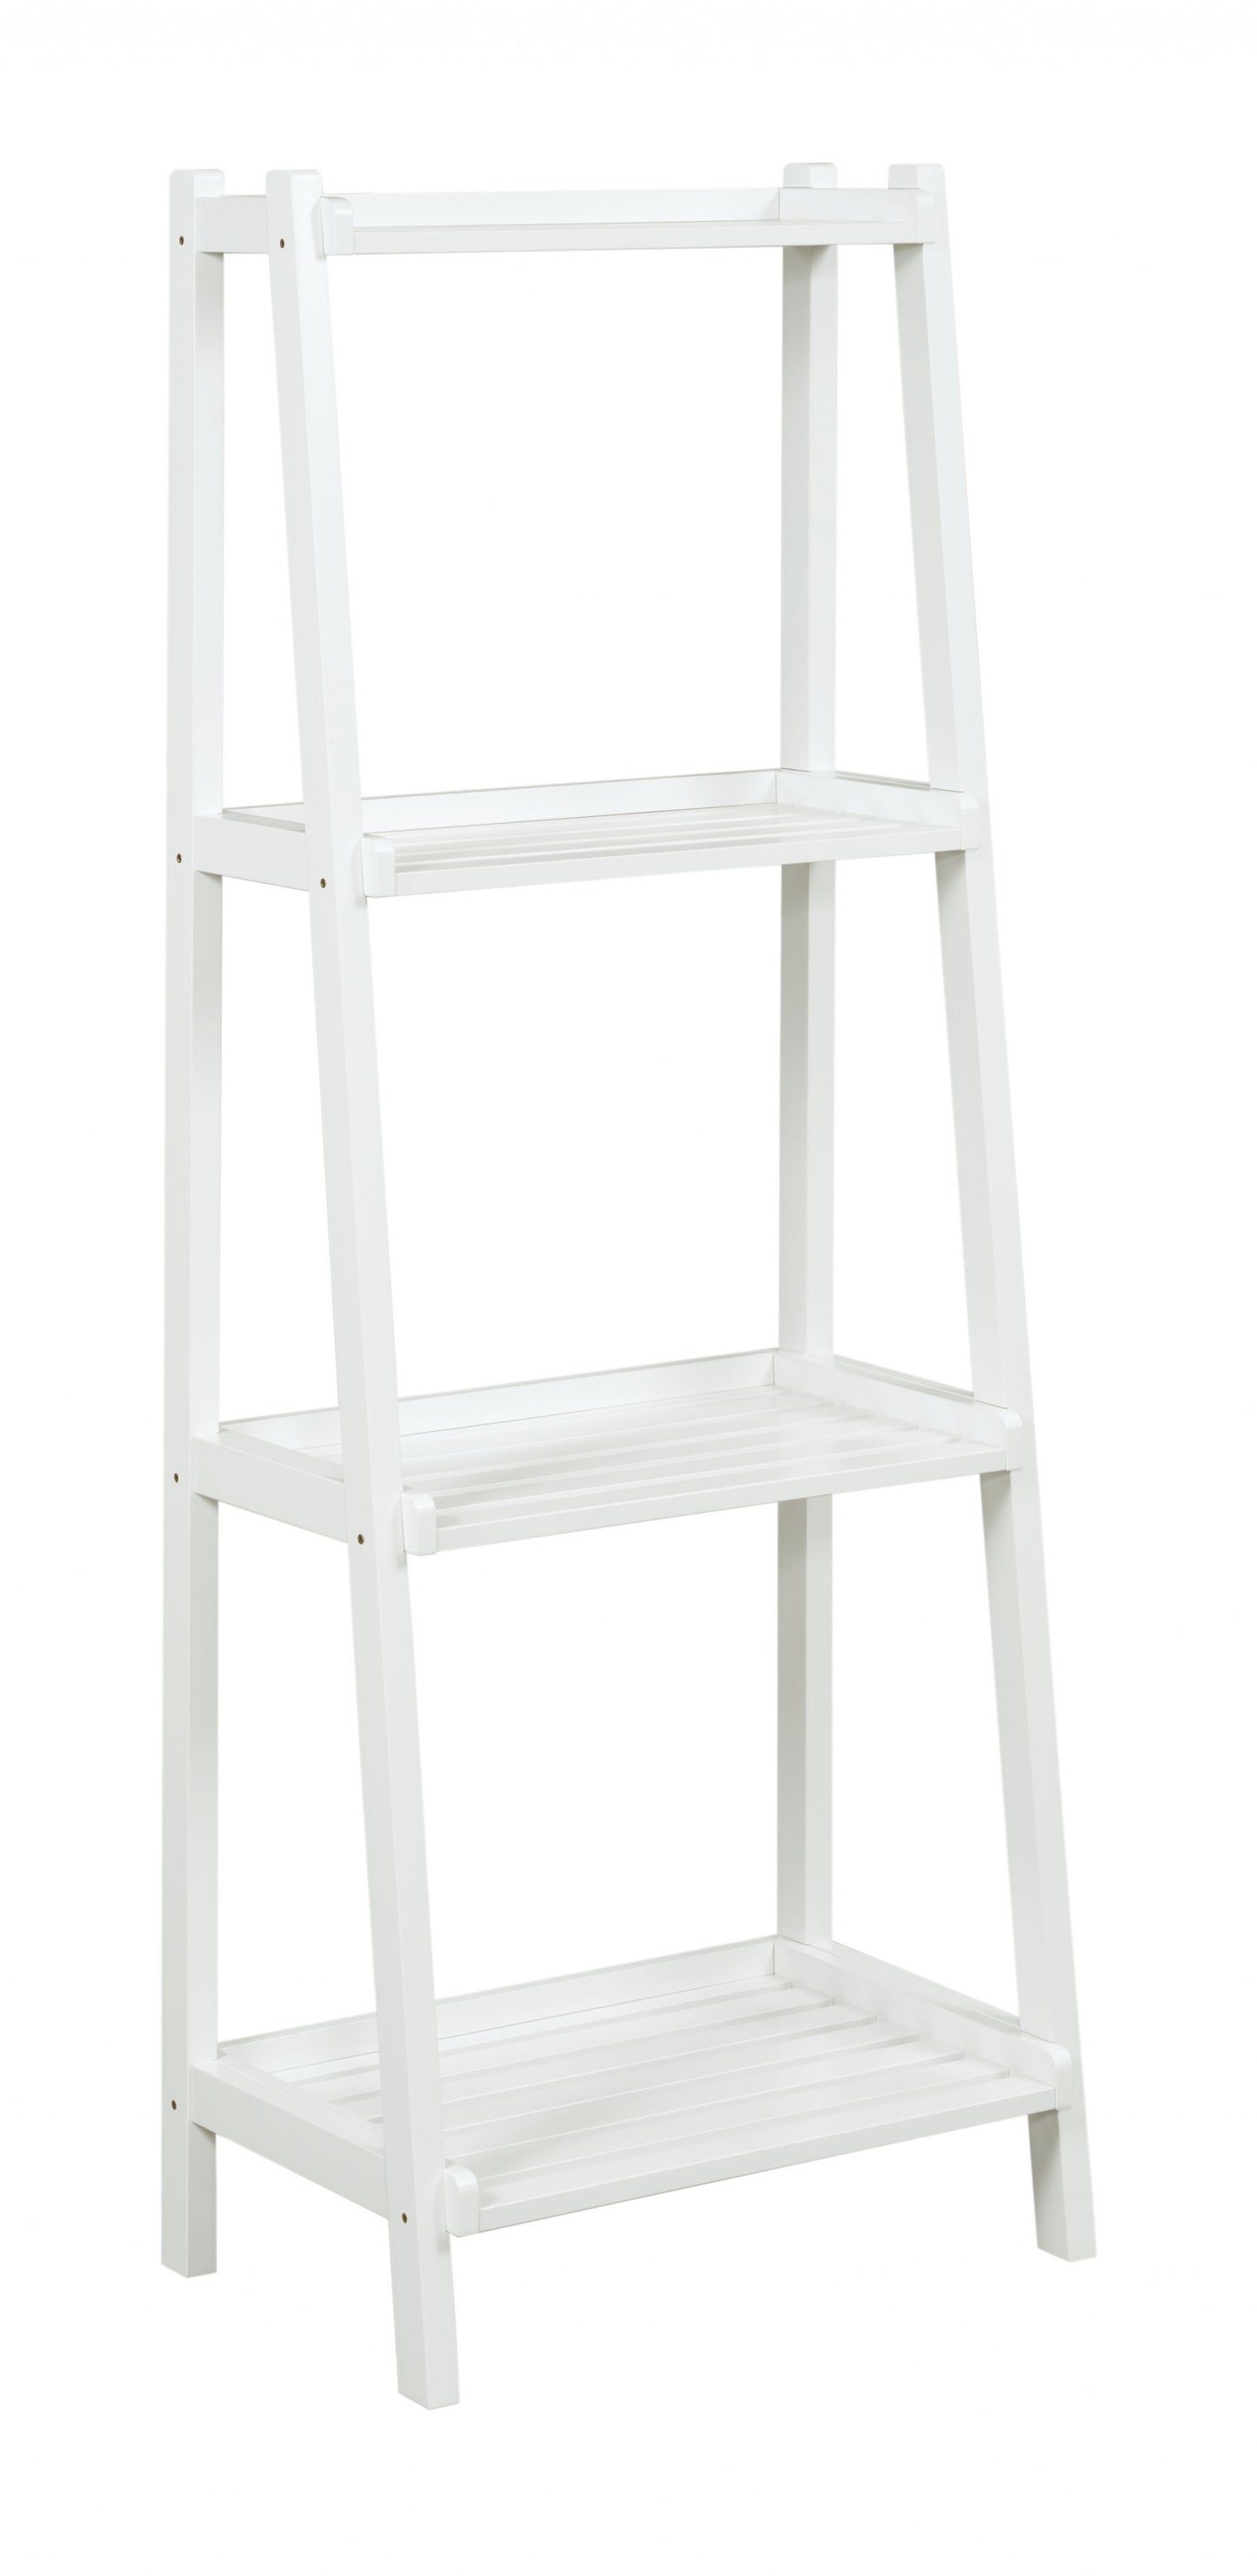 60" Ladder Bookcase With 4 Shelves In White